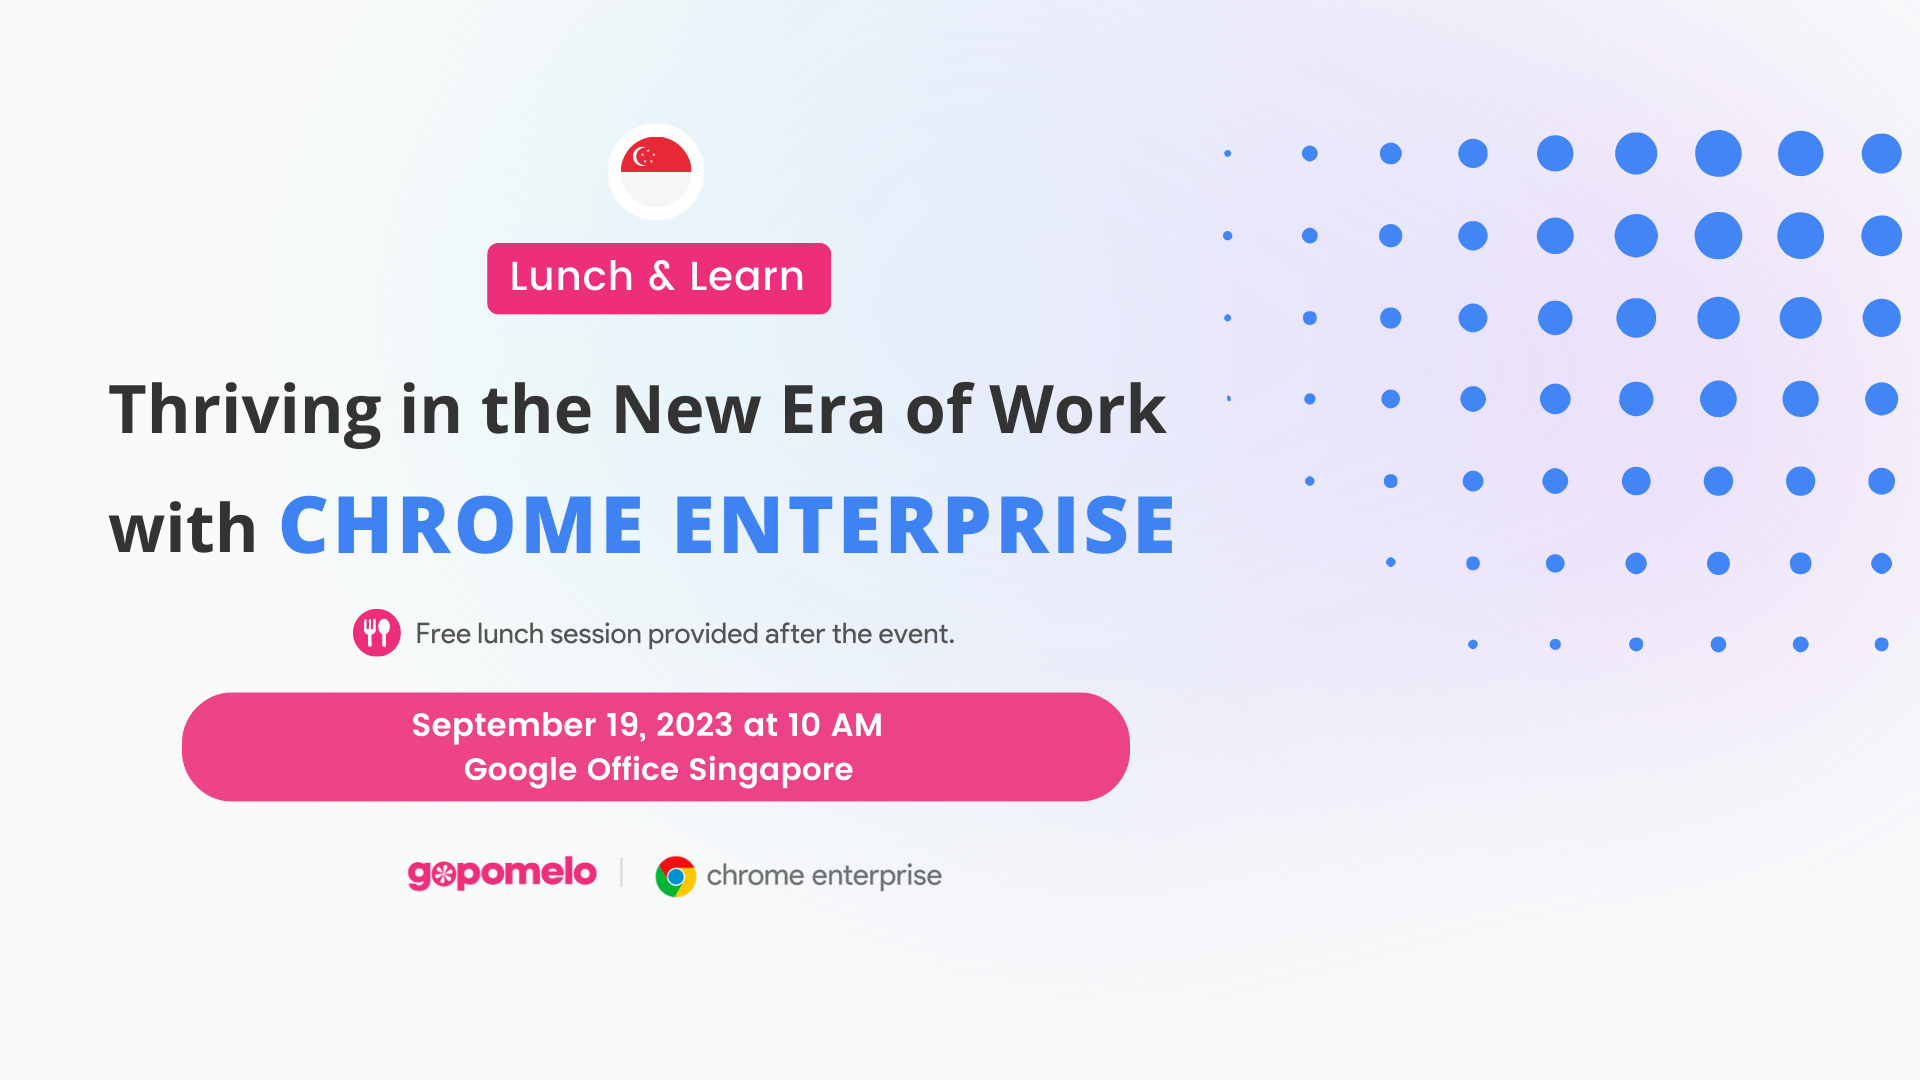 [Singapore] Lunch & Learn: Thriving in the New Era of Work with Chrome Enterprise